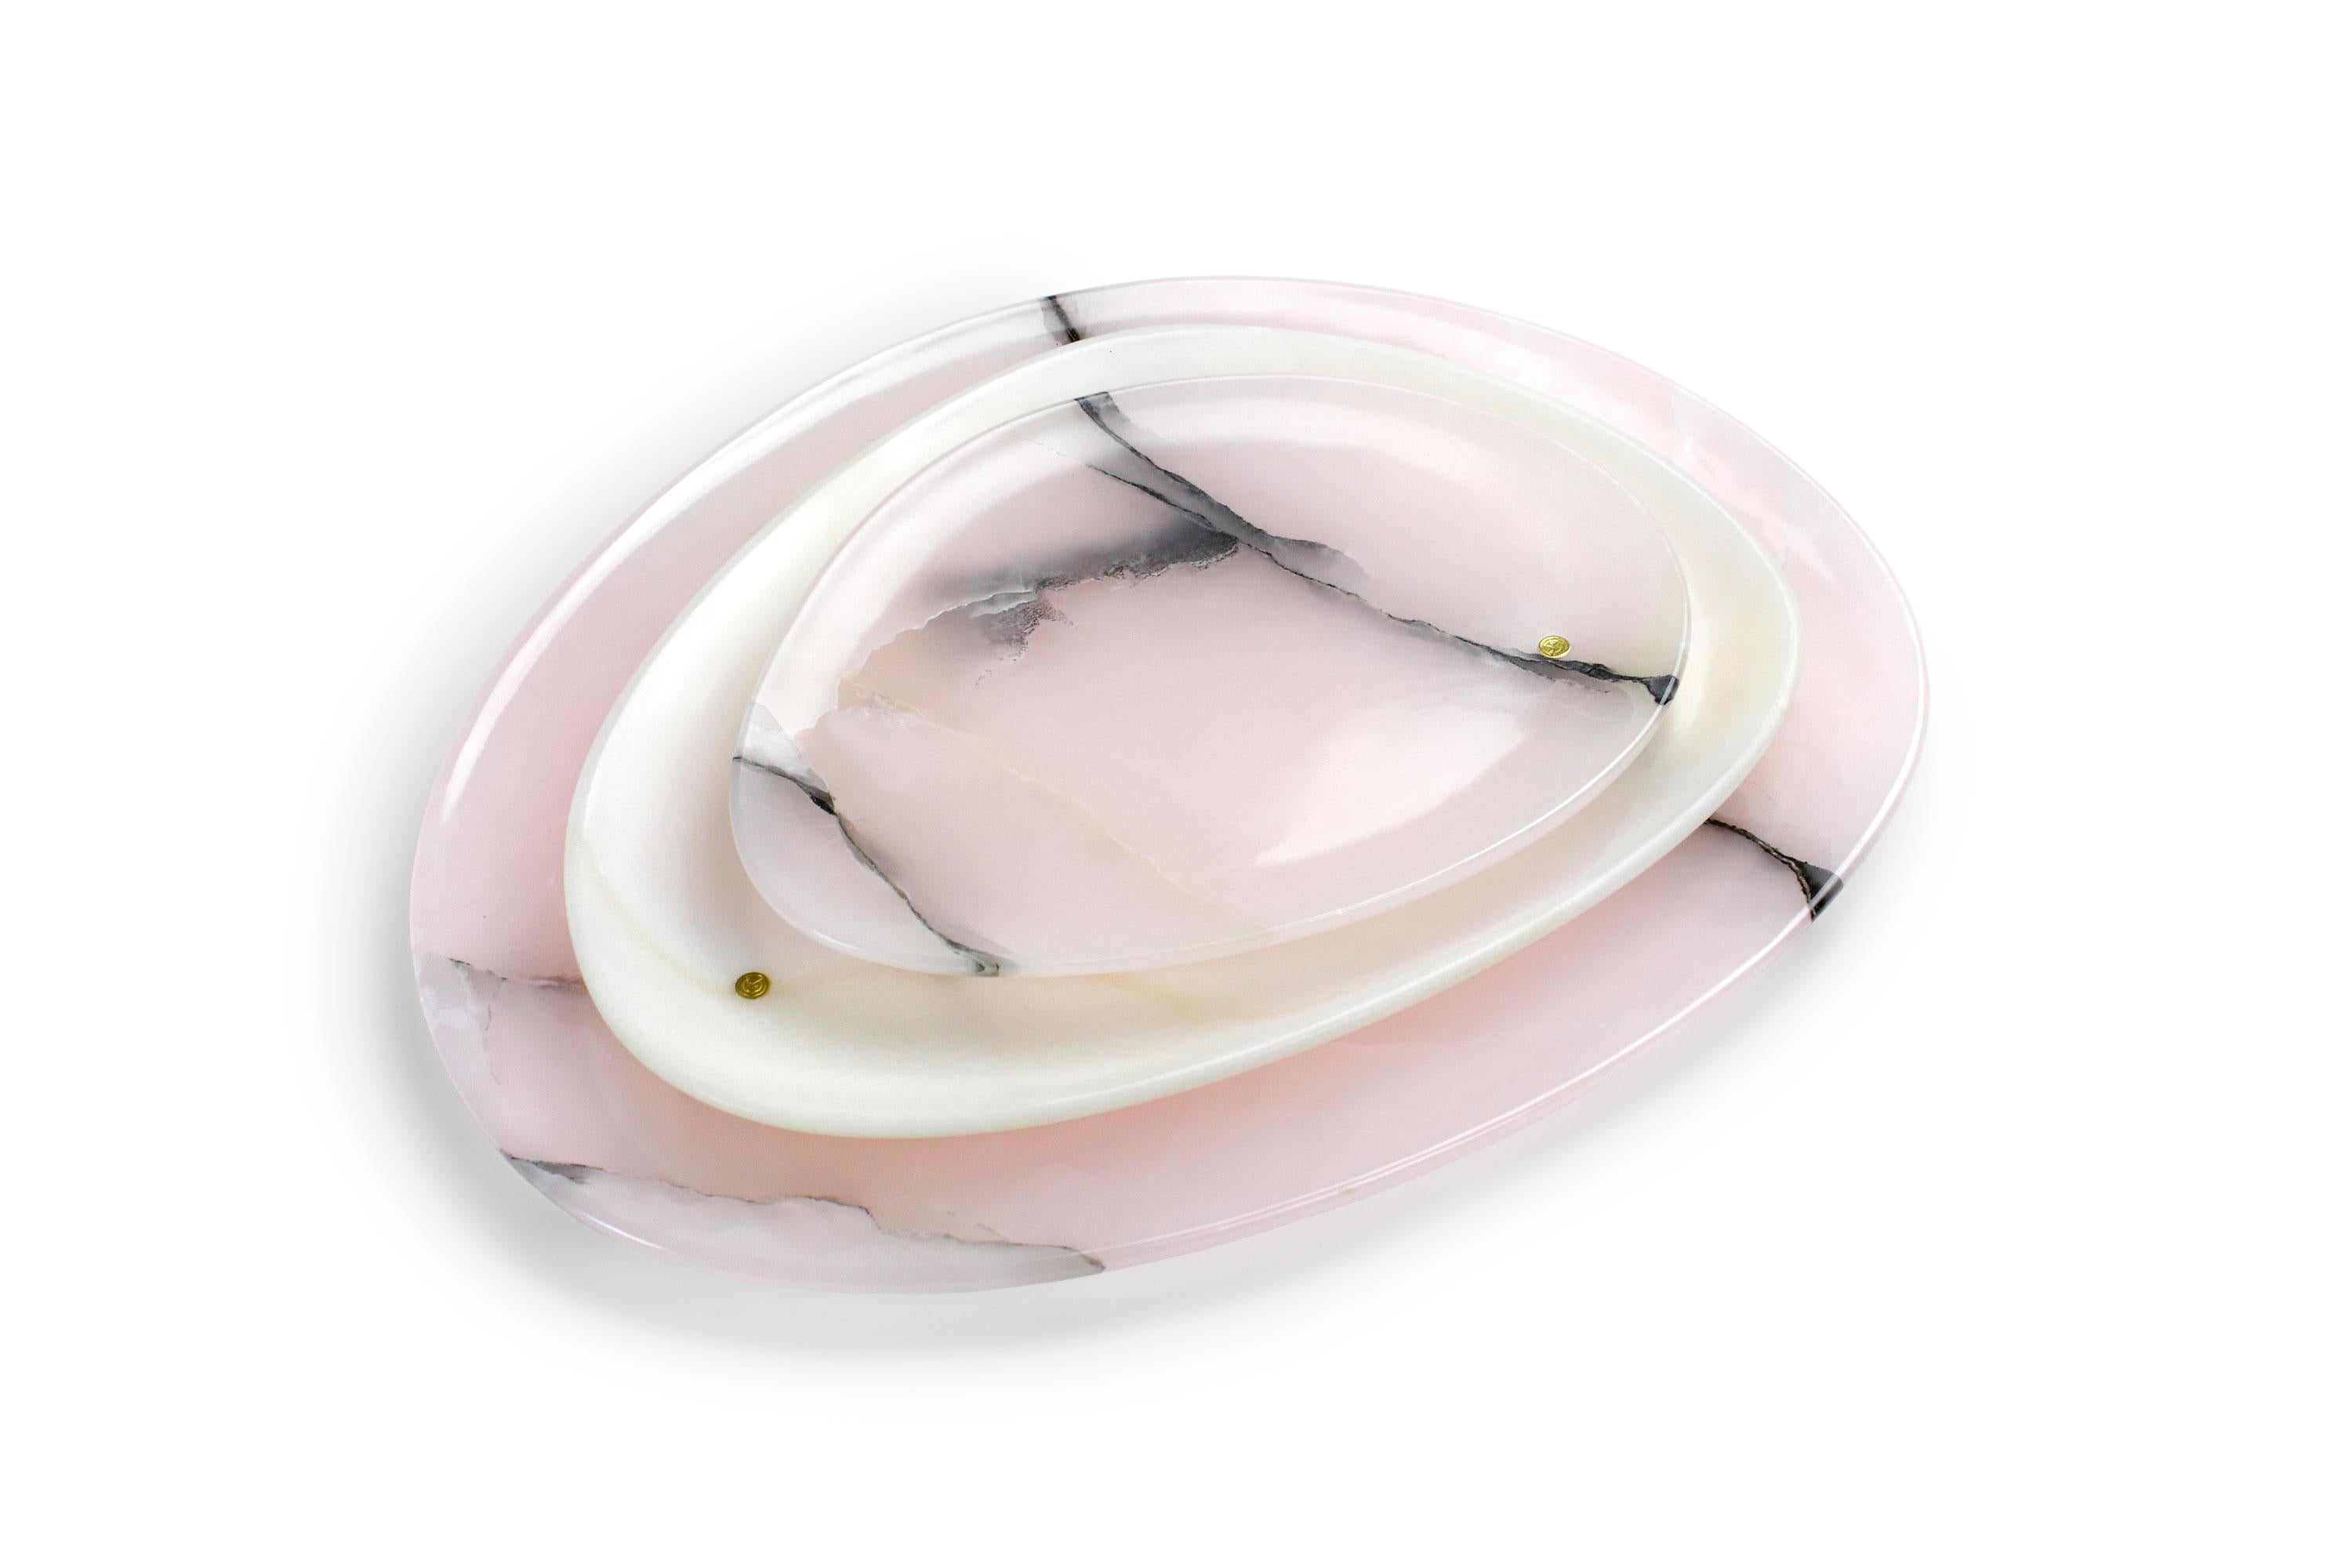 Hand carved presentation plates in white and pink onyx. 
Multiple use as plates, platters and placers. 

Dimensions: Small – L 24, W 20, H 1.8 cm, medium – L 30, W 28, H 1.8 cm, big – L 36, W 35, H 1.8 cm.
Available in different marbles, onyx and